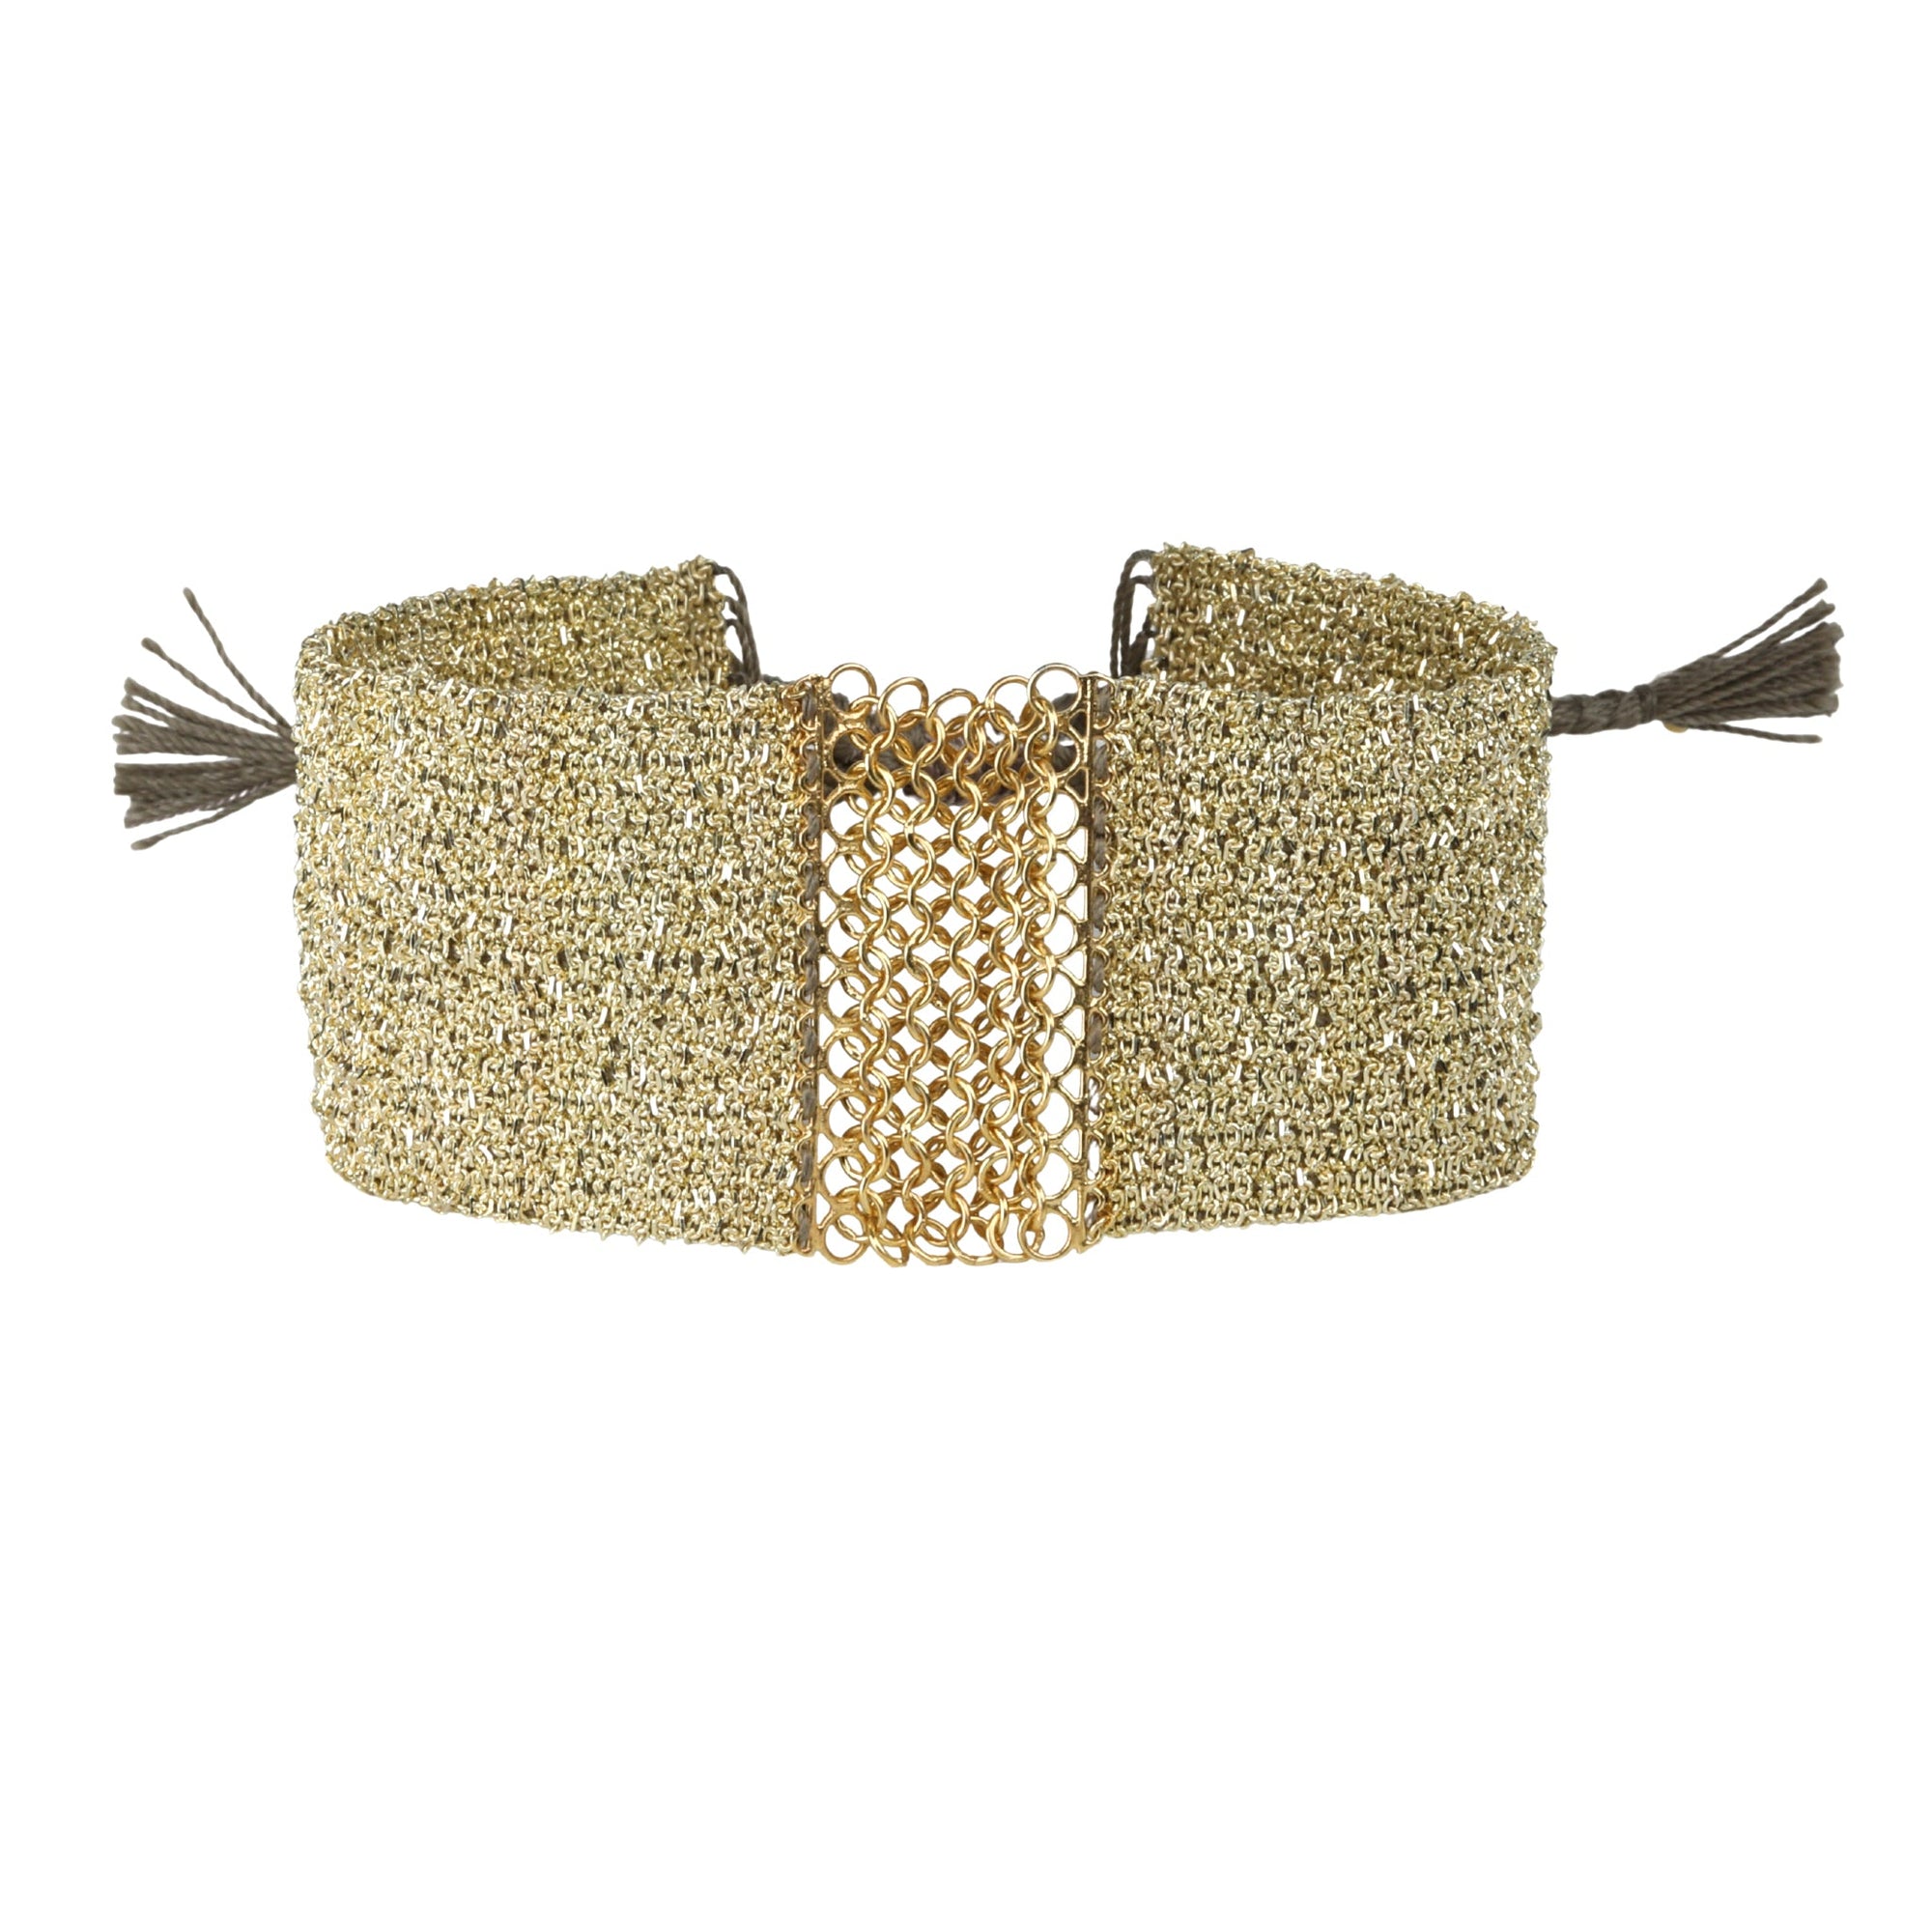 Gold Vermeil Wide Woven Bracelet with Mesh Chain Center - Peridot Fine Jewelry - Marie Laure Chamorel